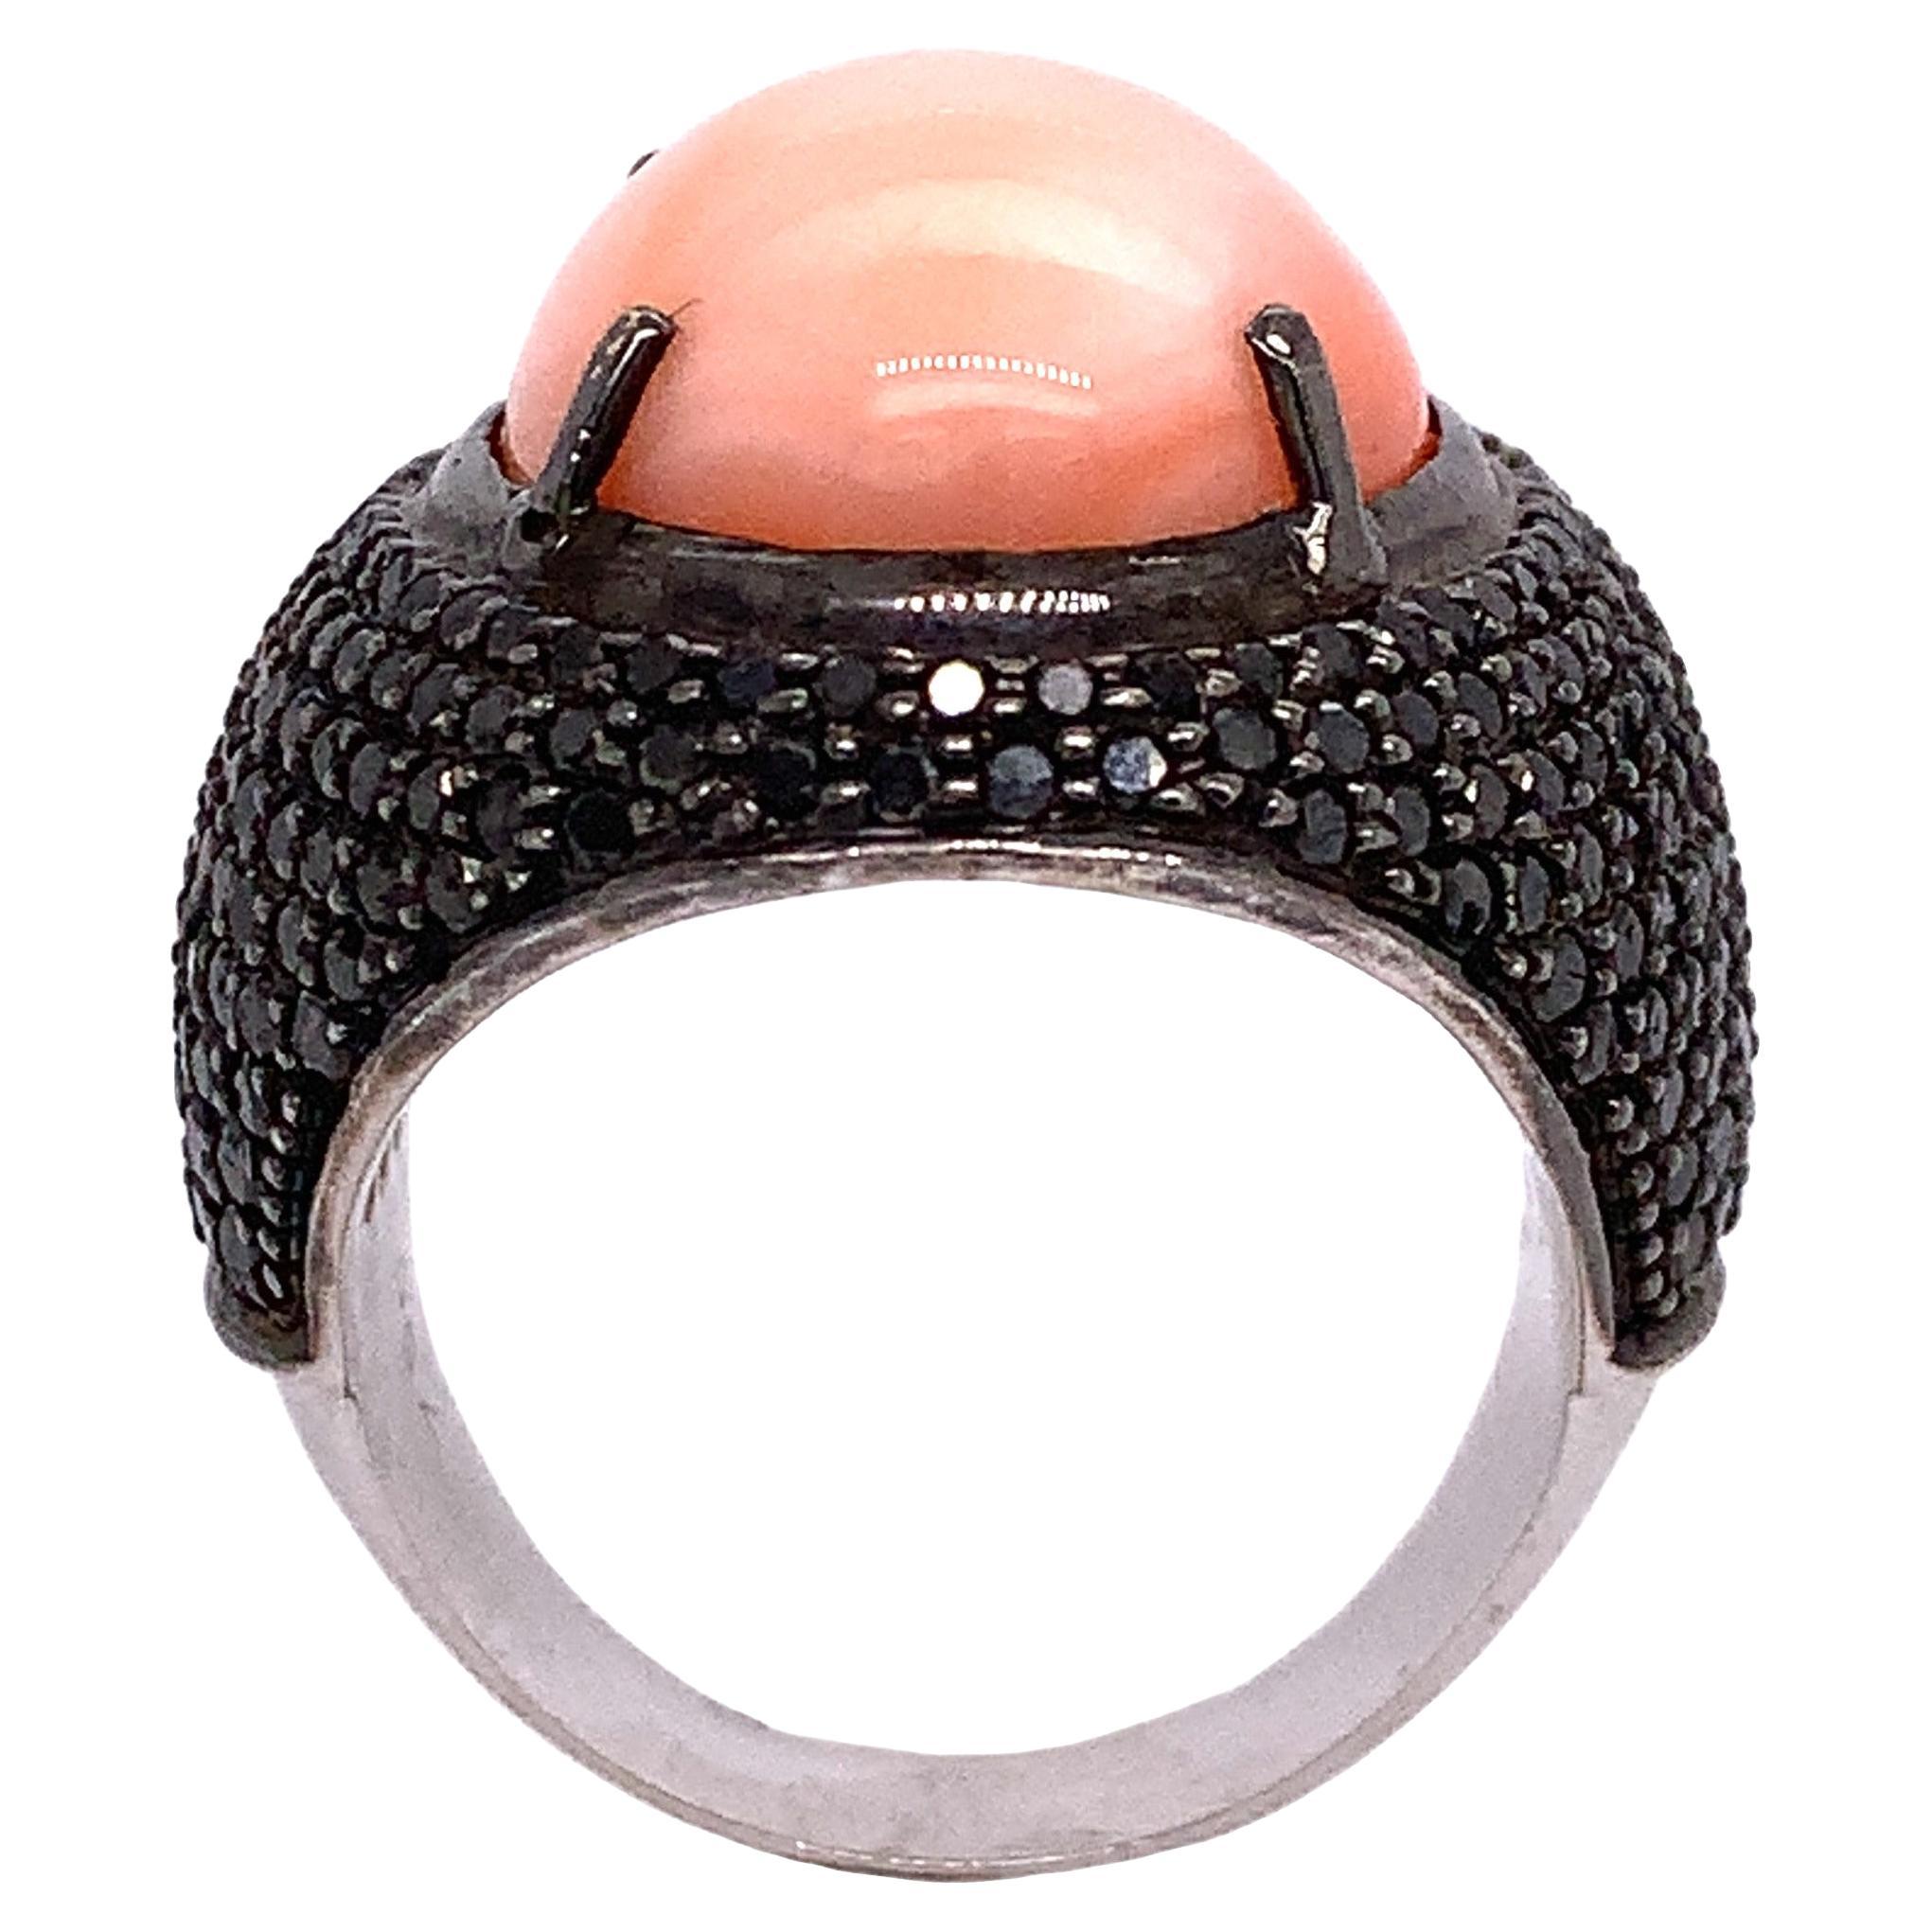 Exclusive Collection

This beautiful Coral surrounded by Black Diamond ring features a unique design that is both fashionable and simple. This stunning piece of cocktail ring set in 18K white gold and it's part of the high-end jewelry from our